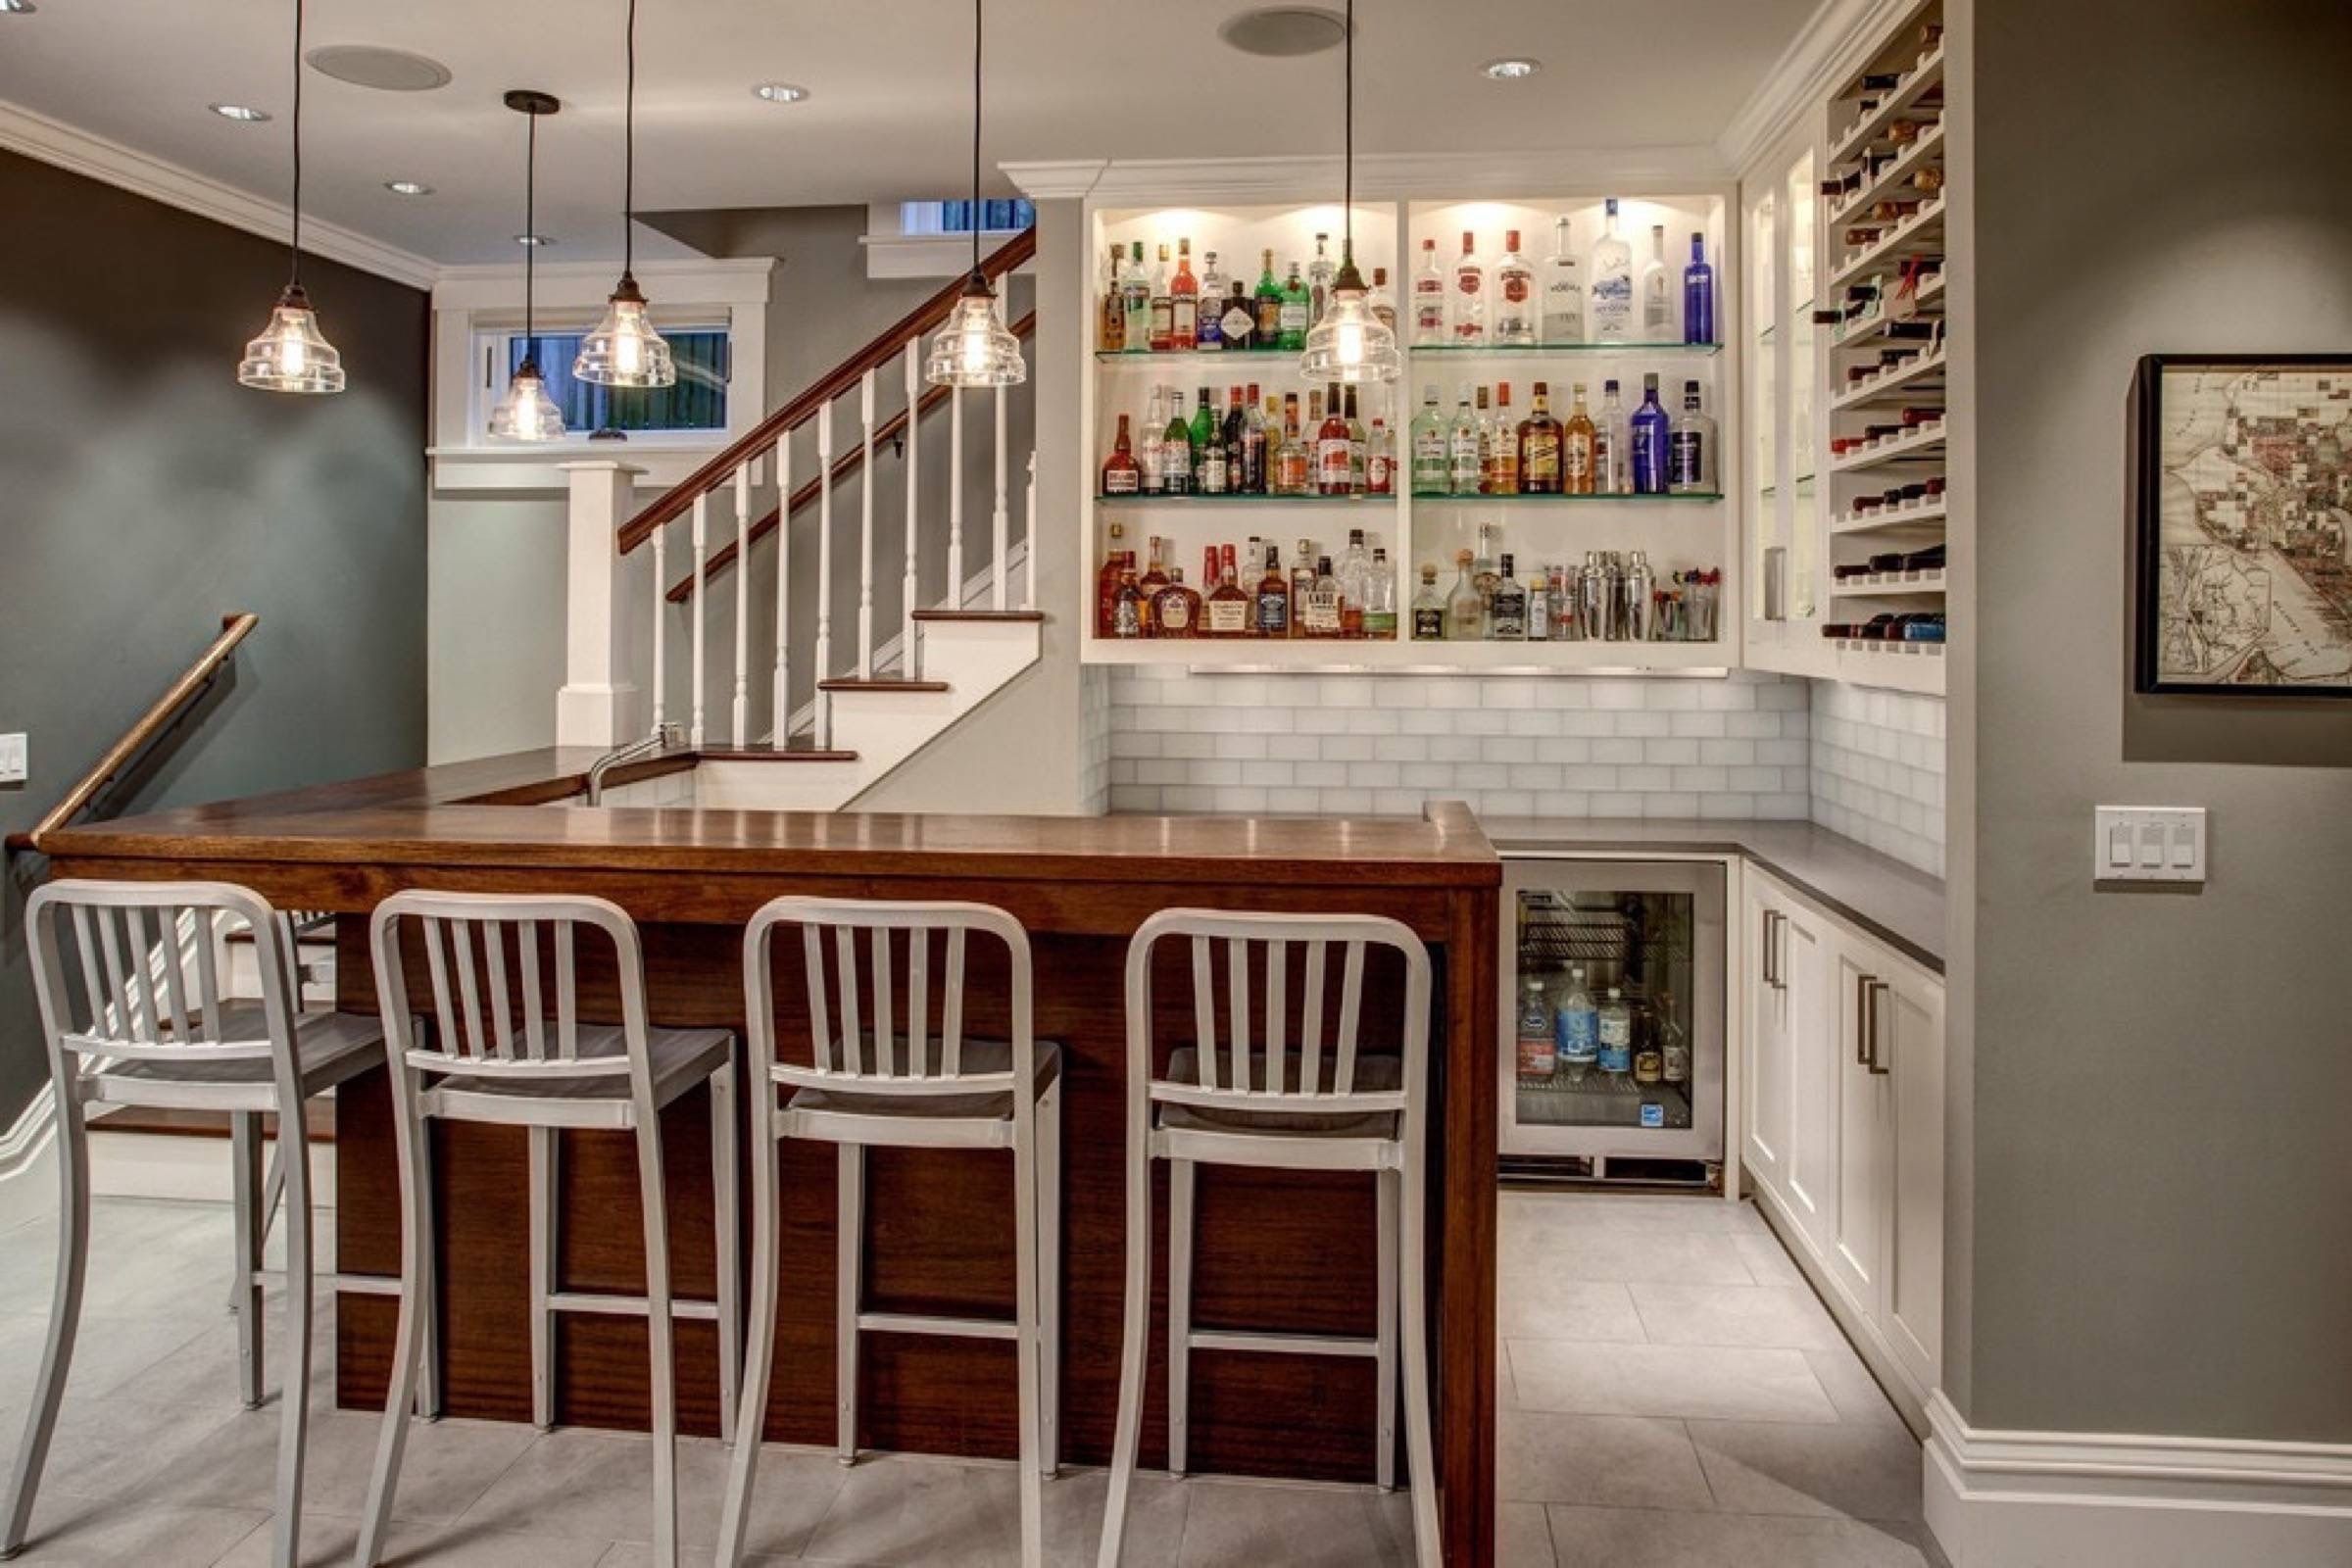 Open shelving wet bar designs are perfect for showcasing your spirits collection